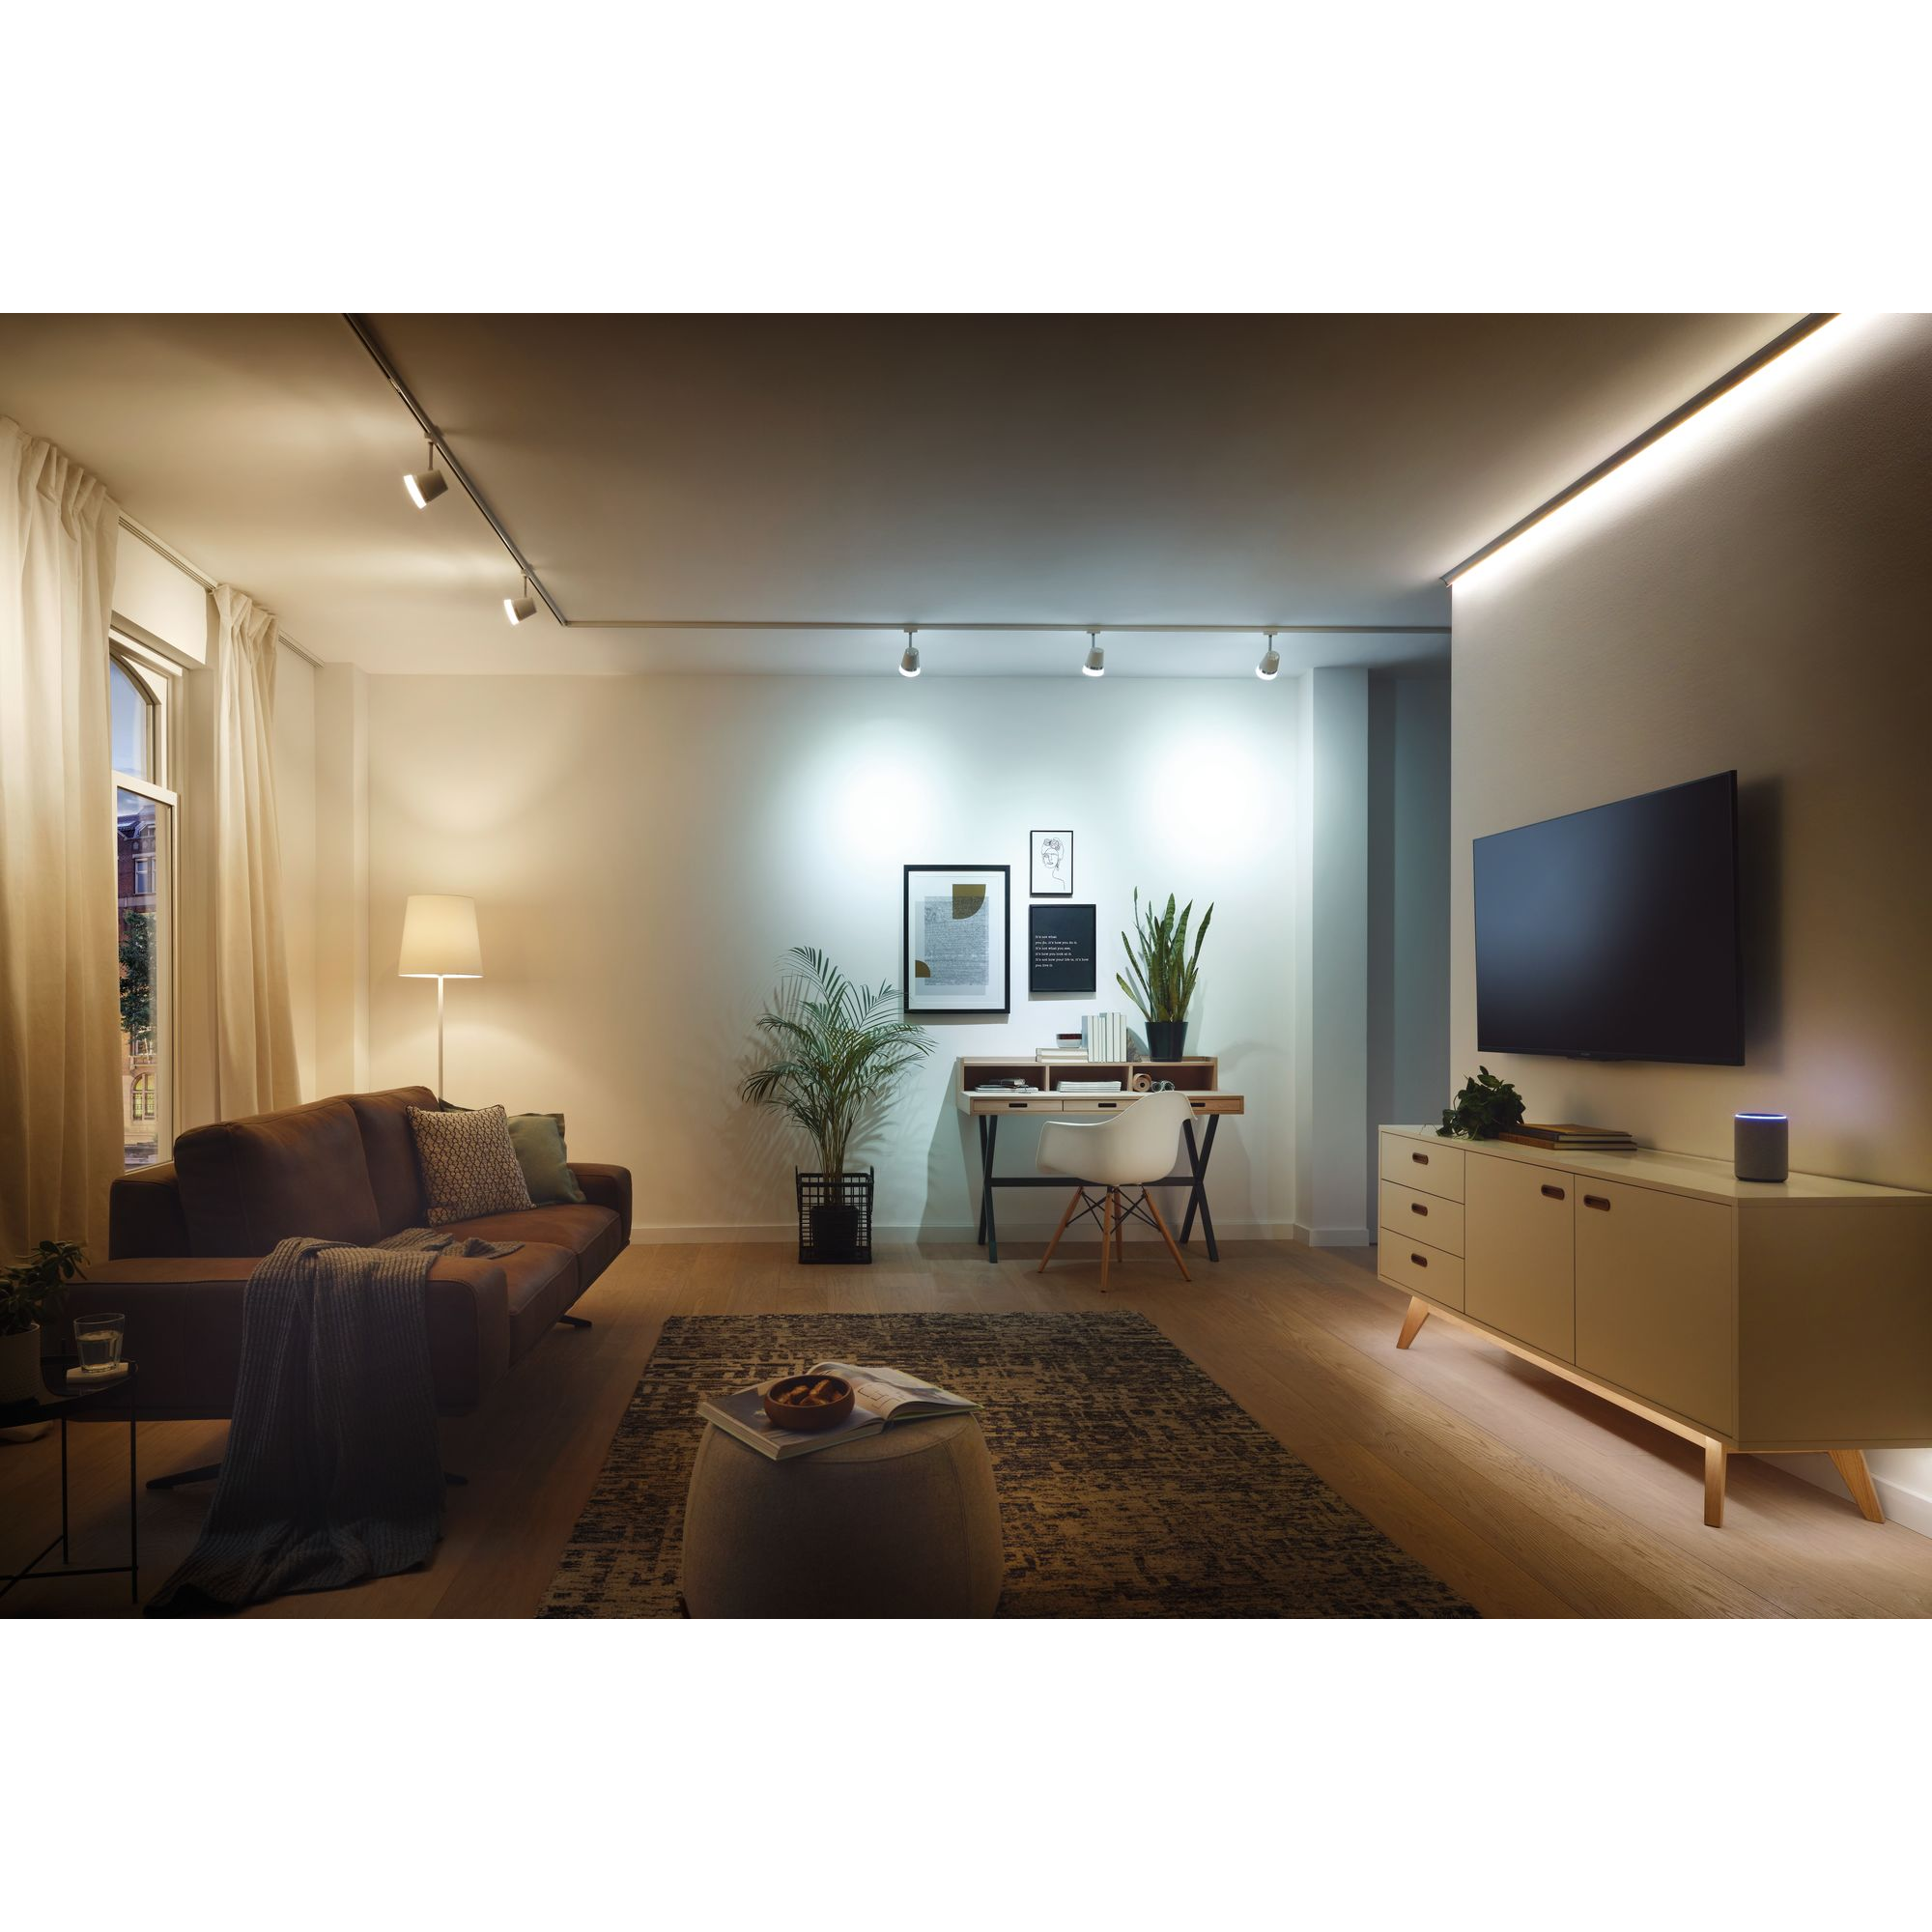 Schalter 'Smart Home MaxLED' Tunable White Control max. 144 W 24 V weiß/grau + product picture